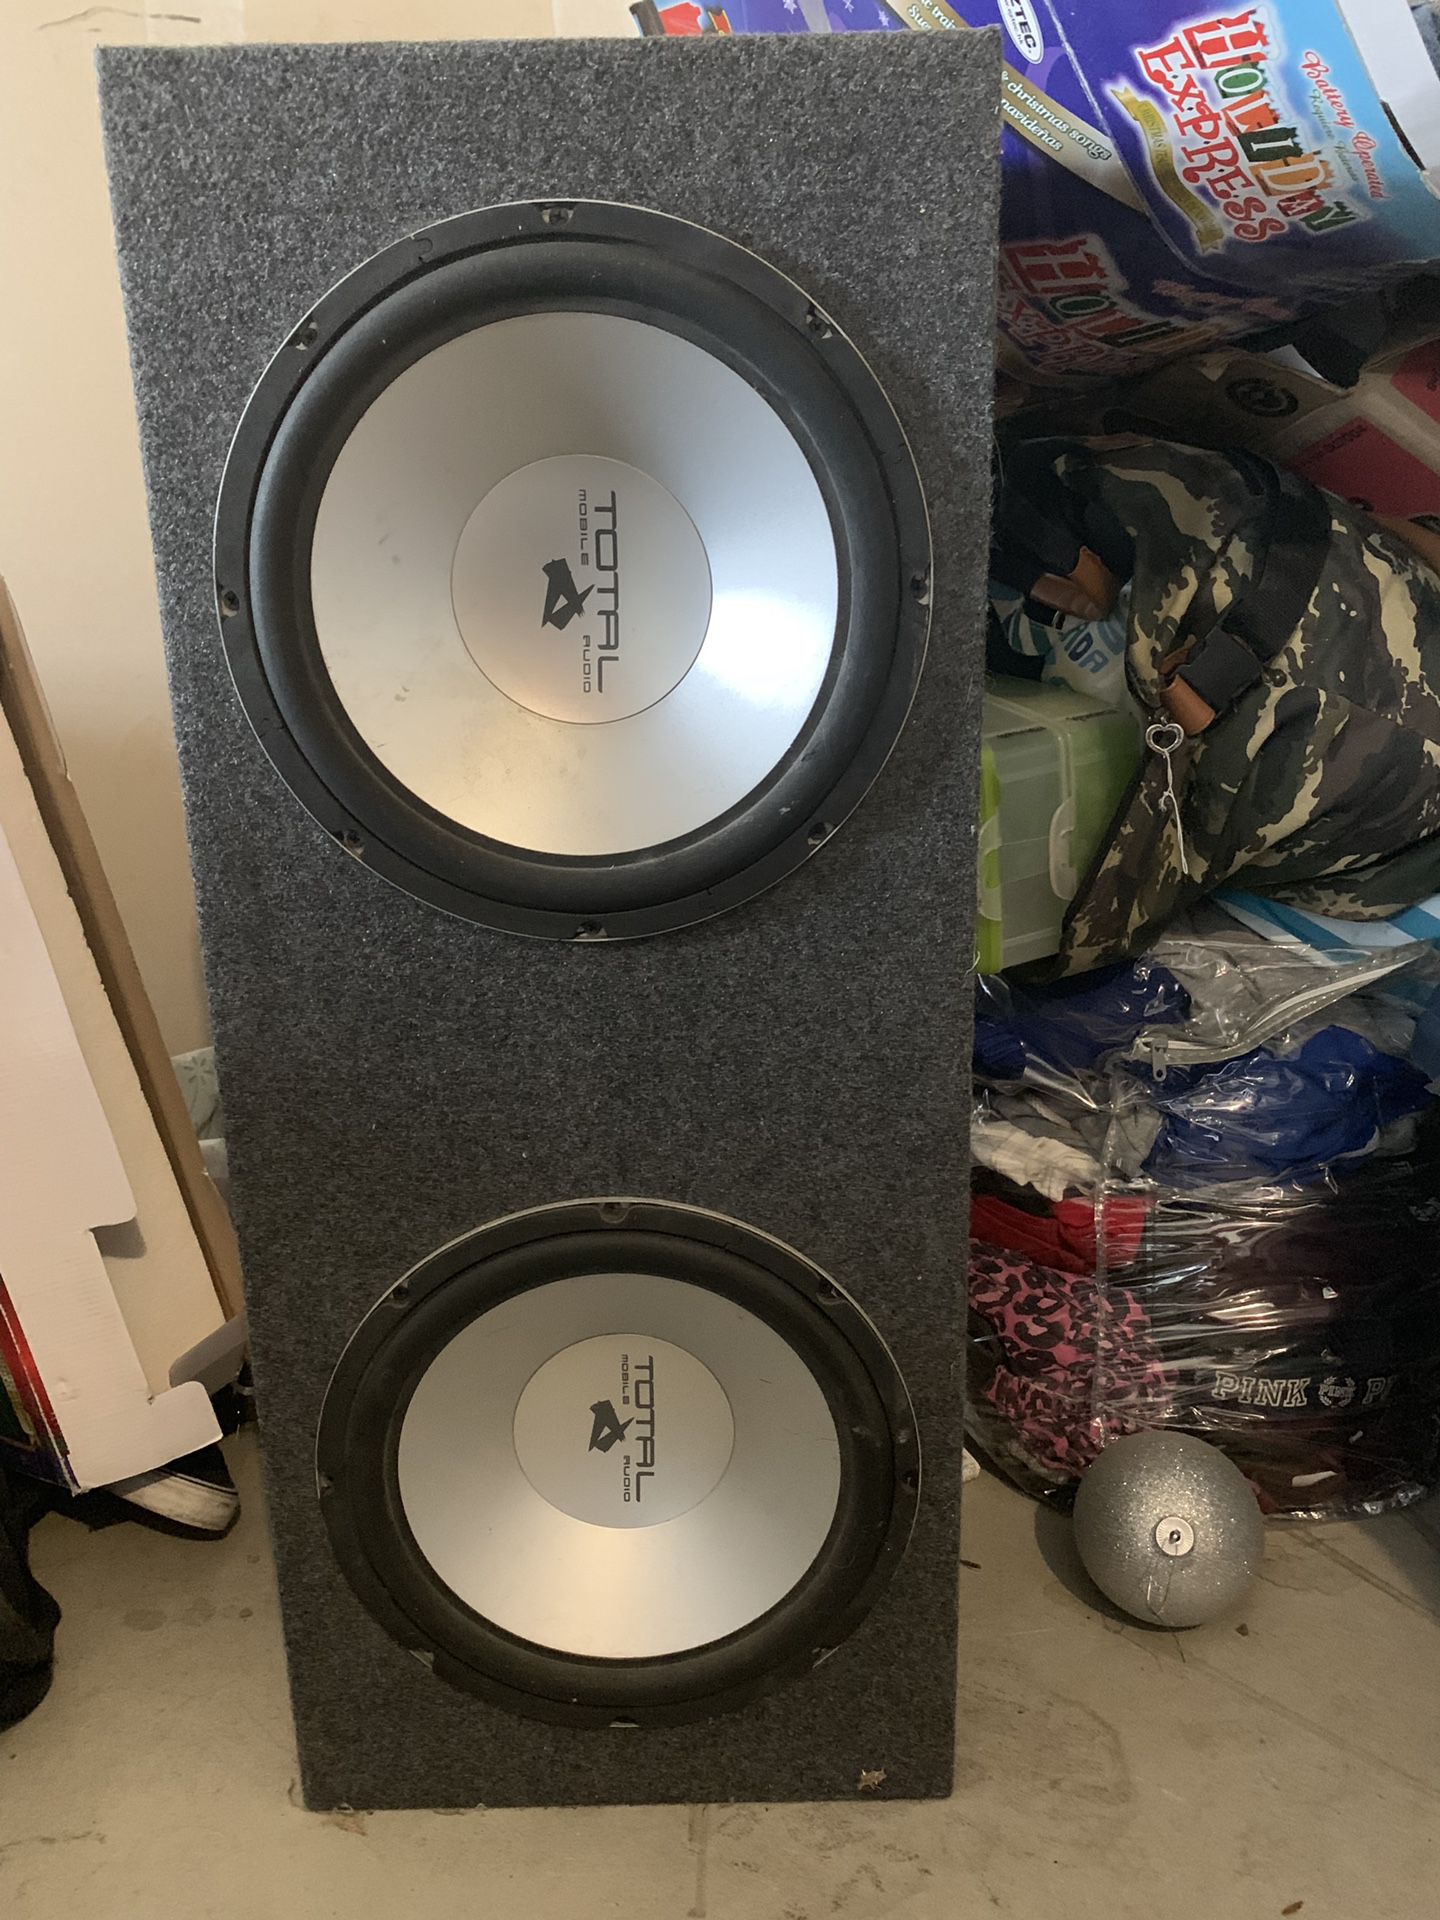 2-12 Total Audio Speakers barley used almost new $90 with box